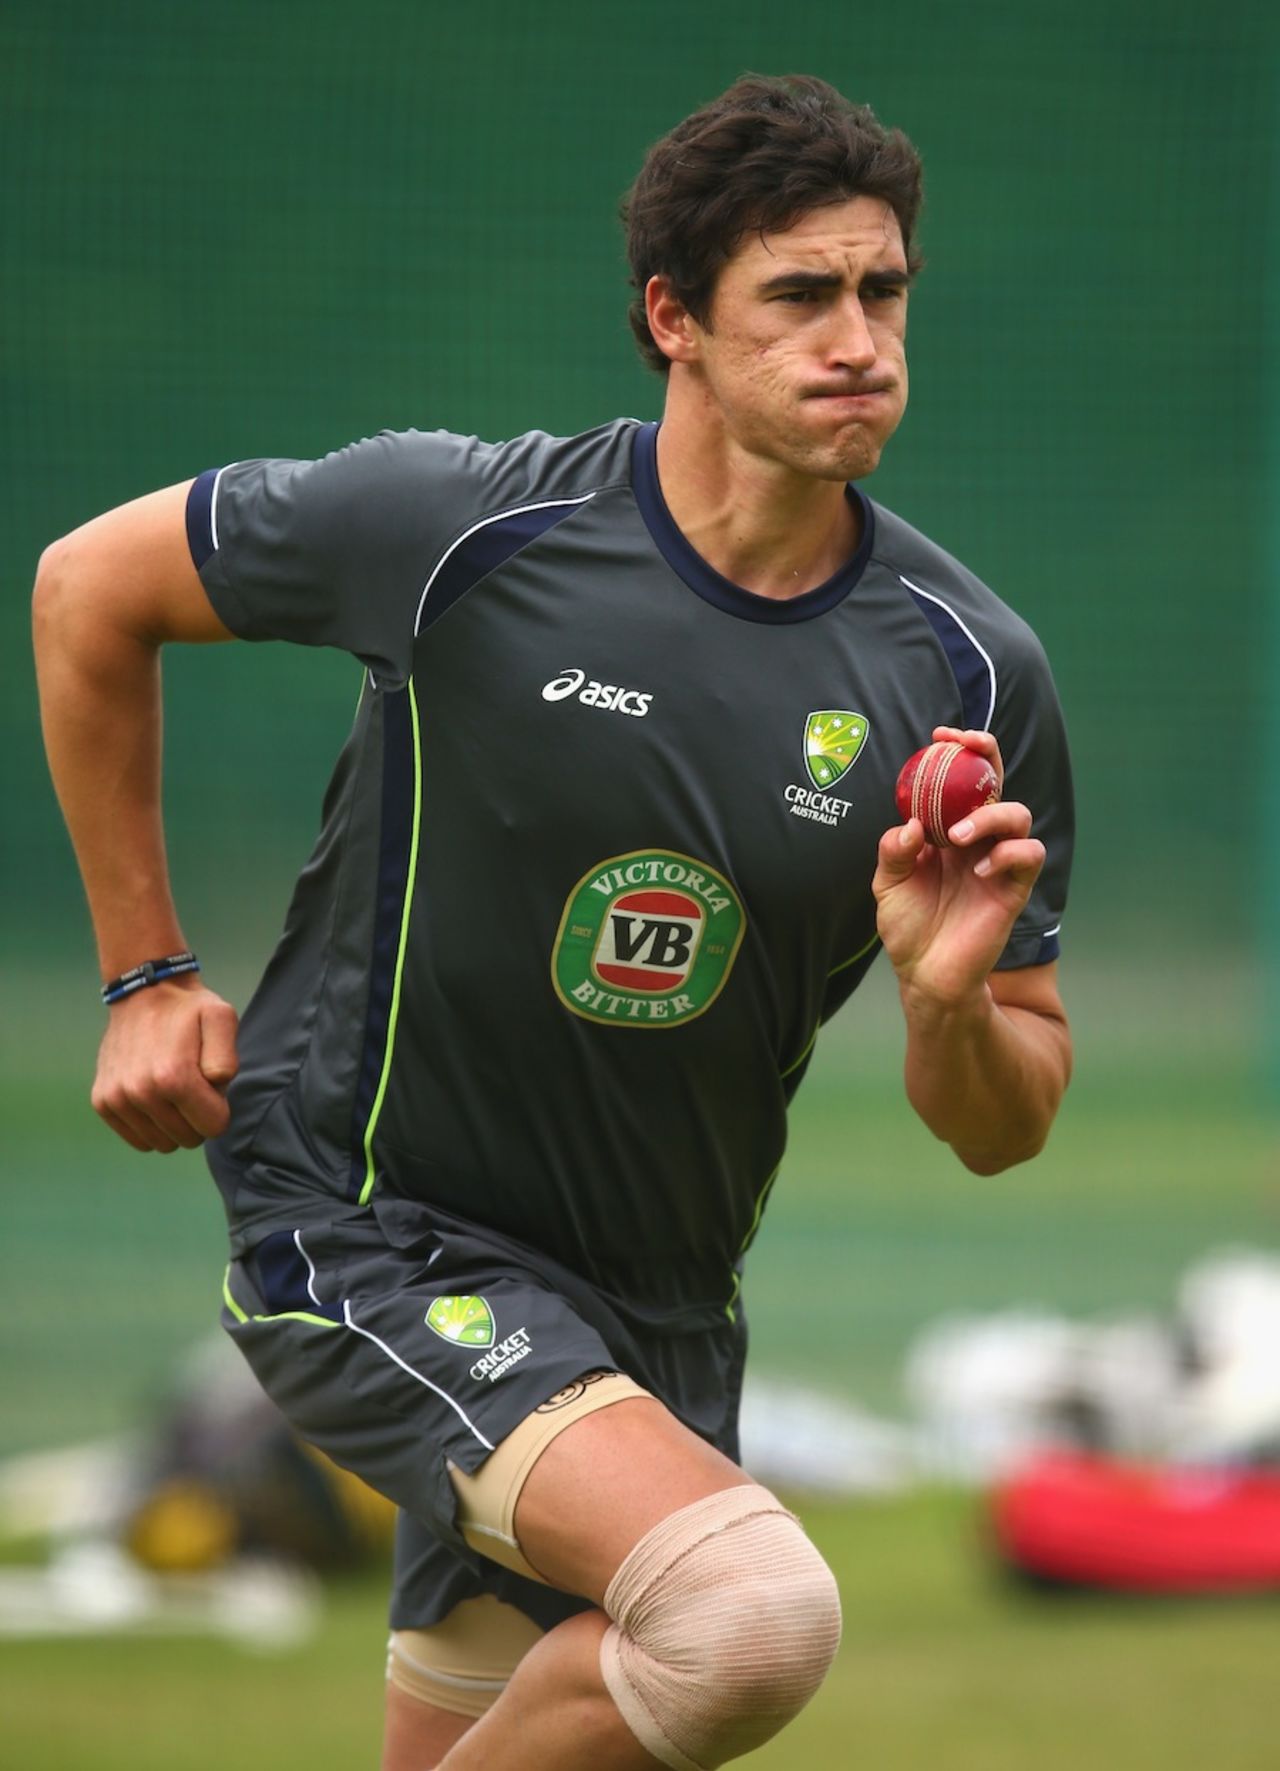 Mitchell Starc prepares to bowl in the nets, Worcester, July 1, 2013